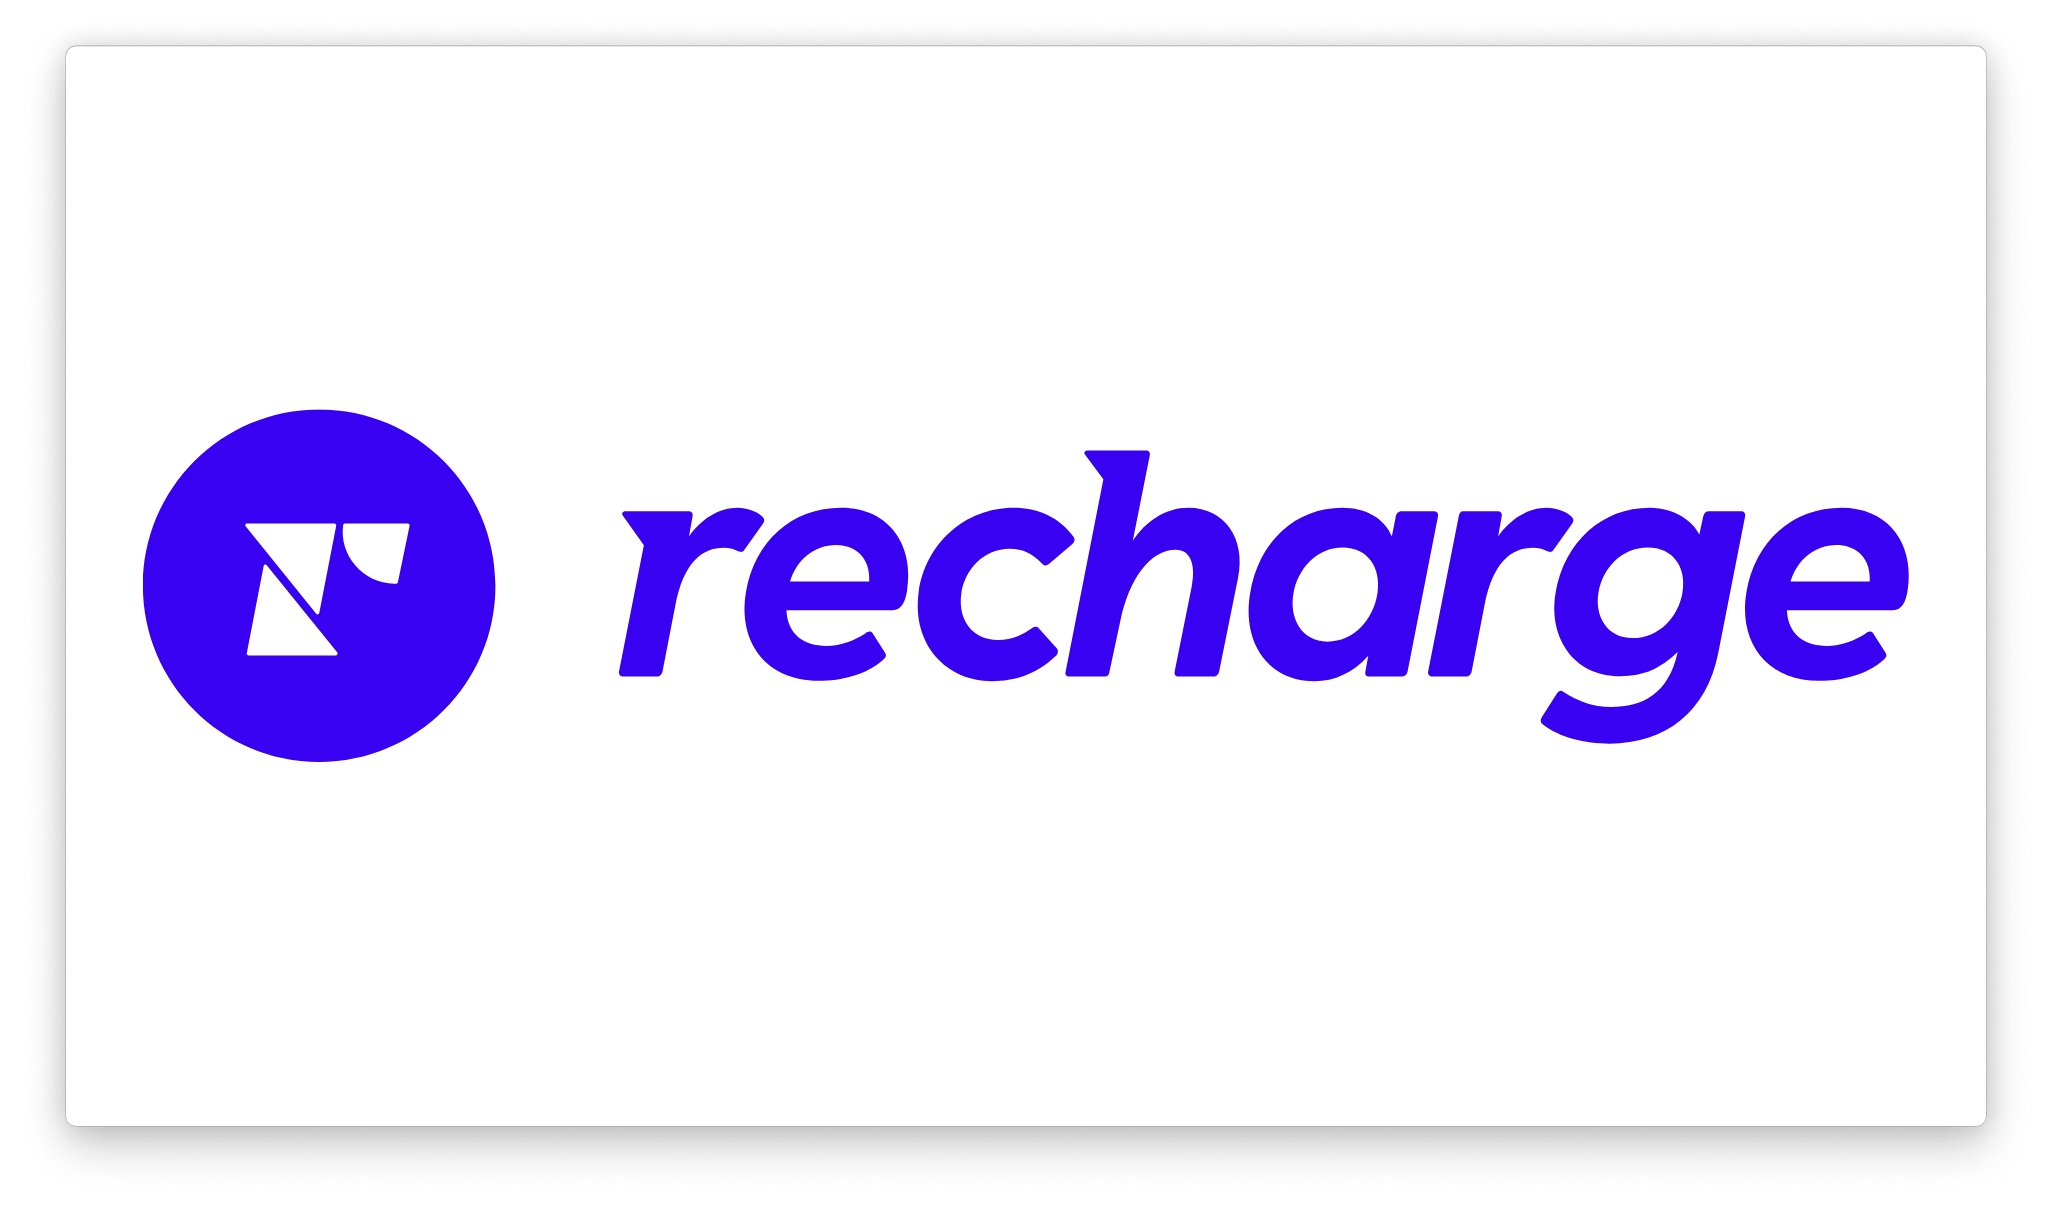 Recharge integration, as implemented by eCommerce development agency, magic42